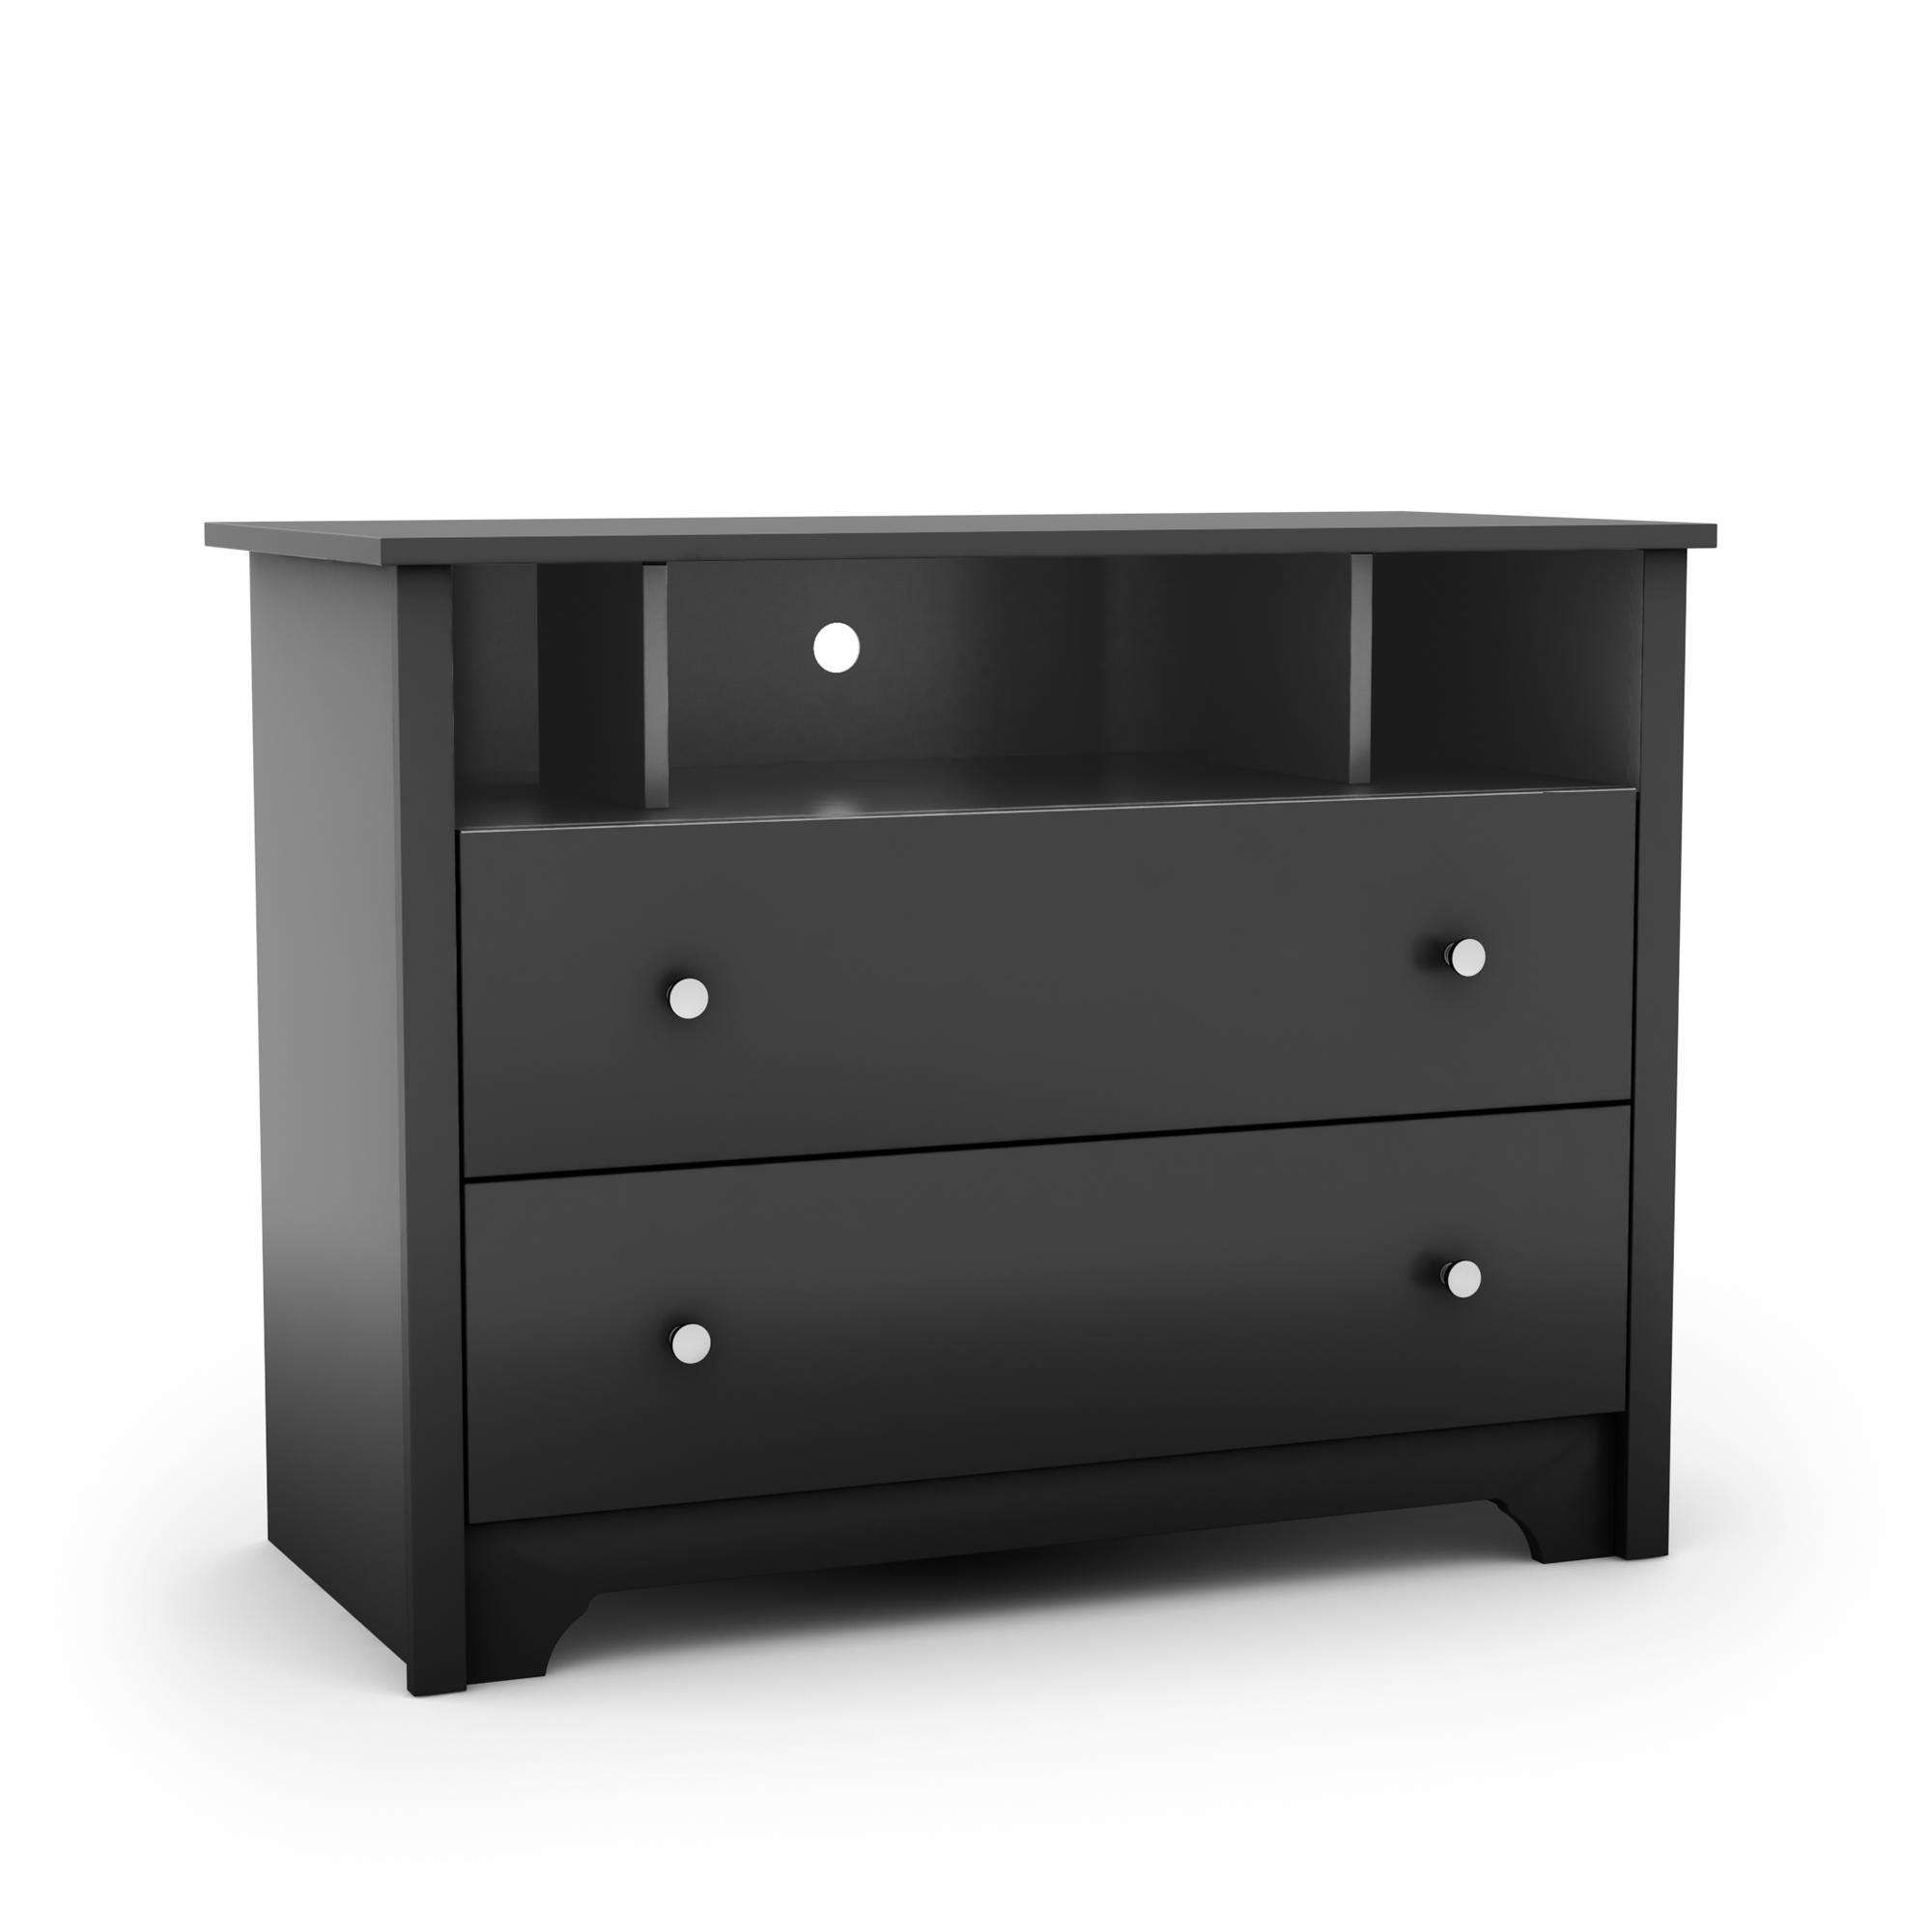 Square Black Tv Stand With Storage Drawers And Shelves Of Cool Tv Regarding Tv Cabinets With Drawers (View 4 of 20)